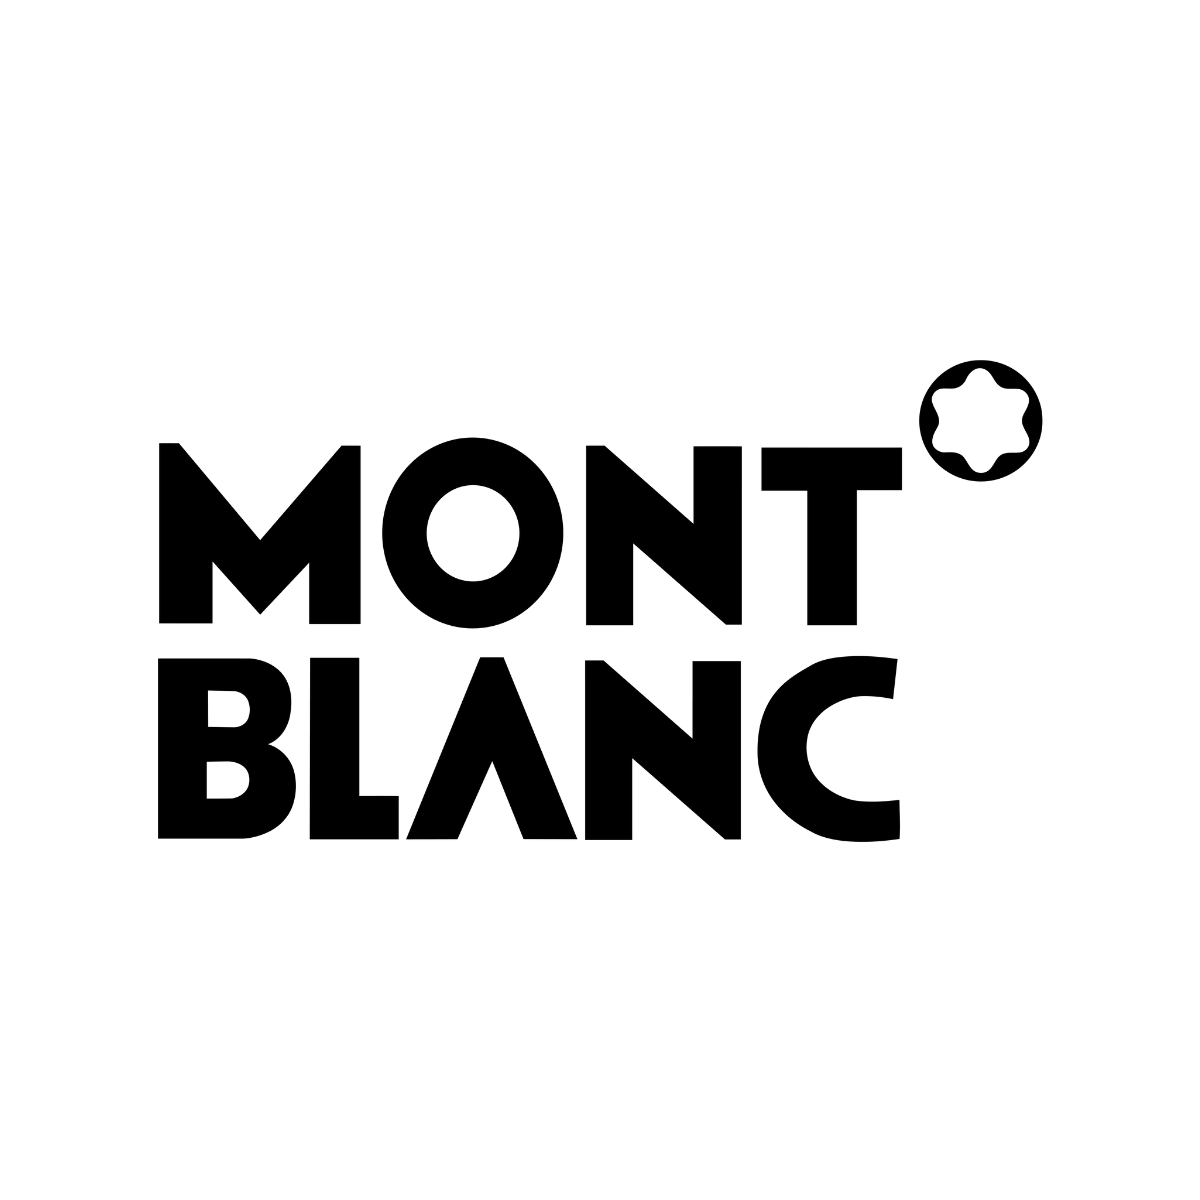 "Mont Blanc Eyewear: Luxury Sunglasses, Optical Frames, and Spectacles for Men and Women"